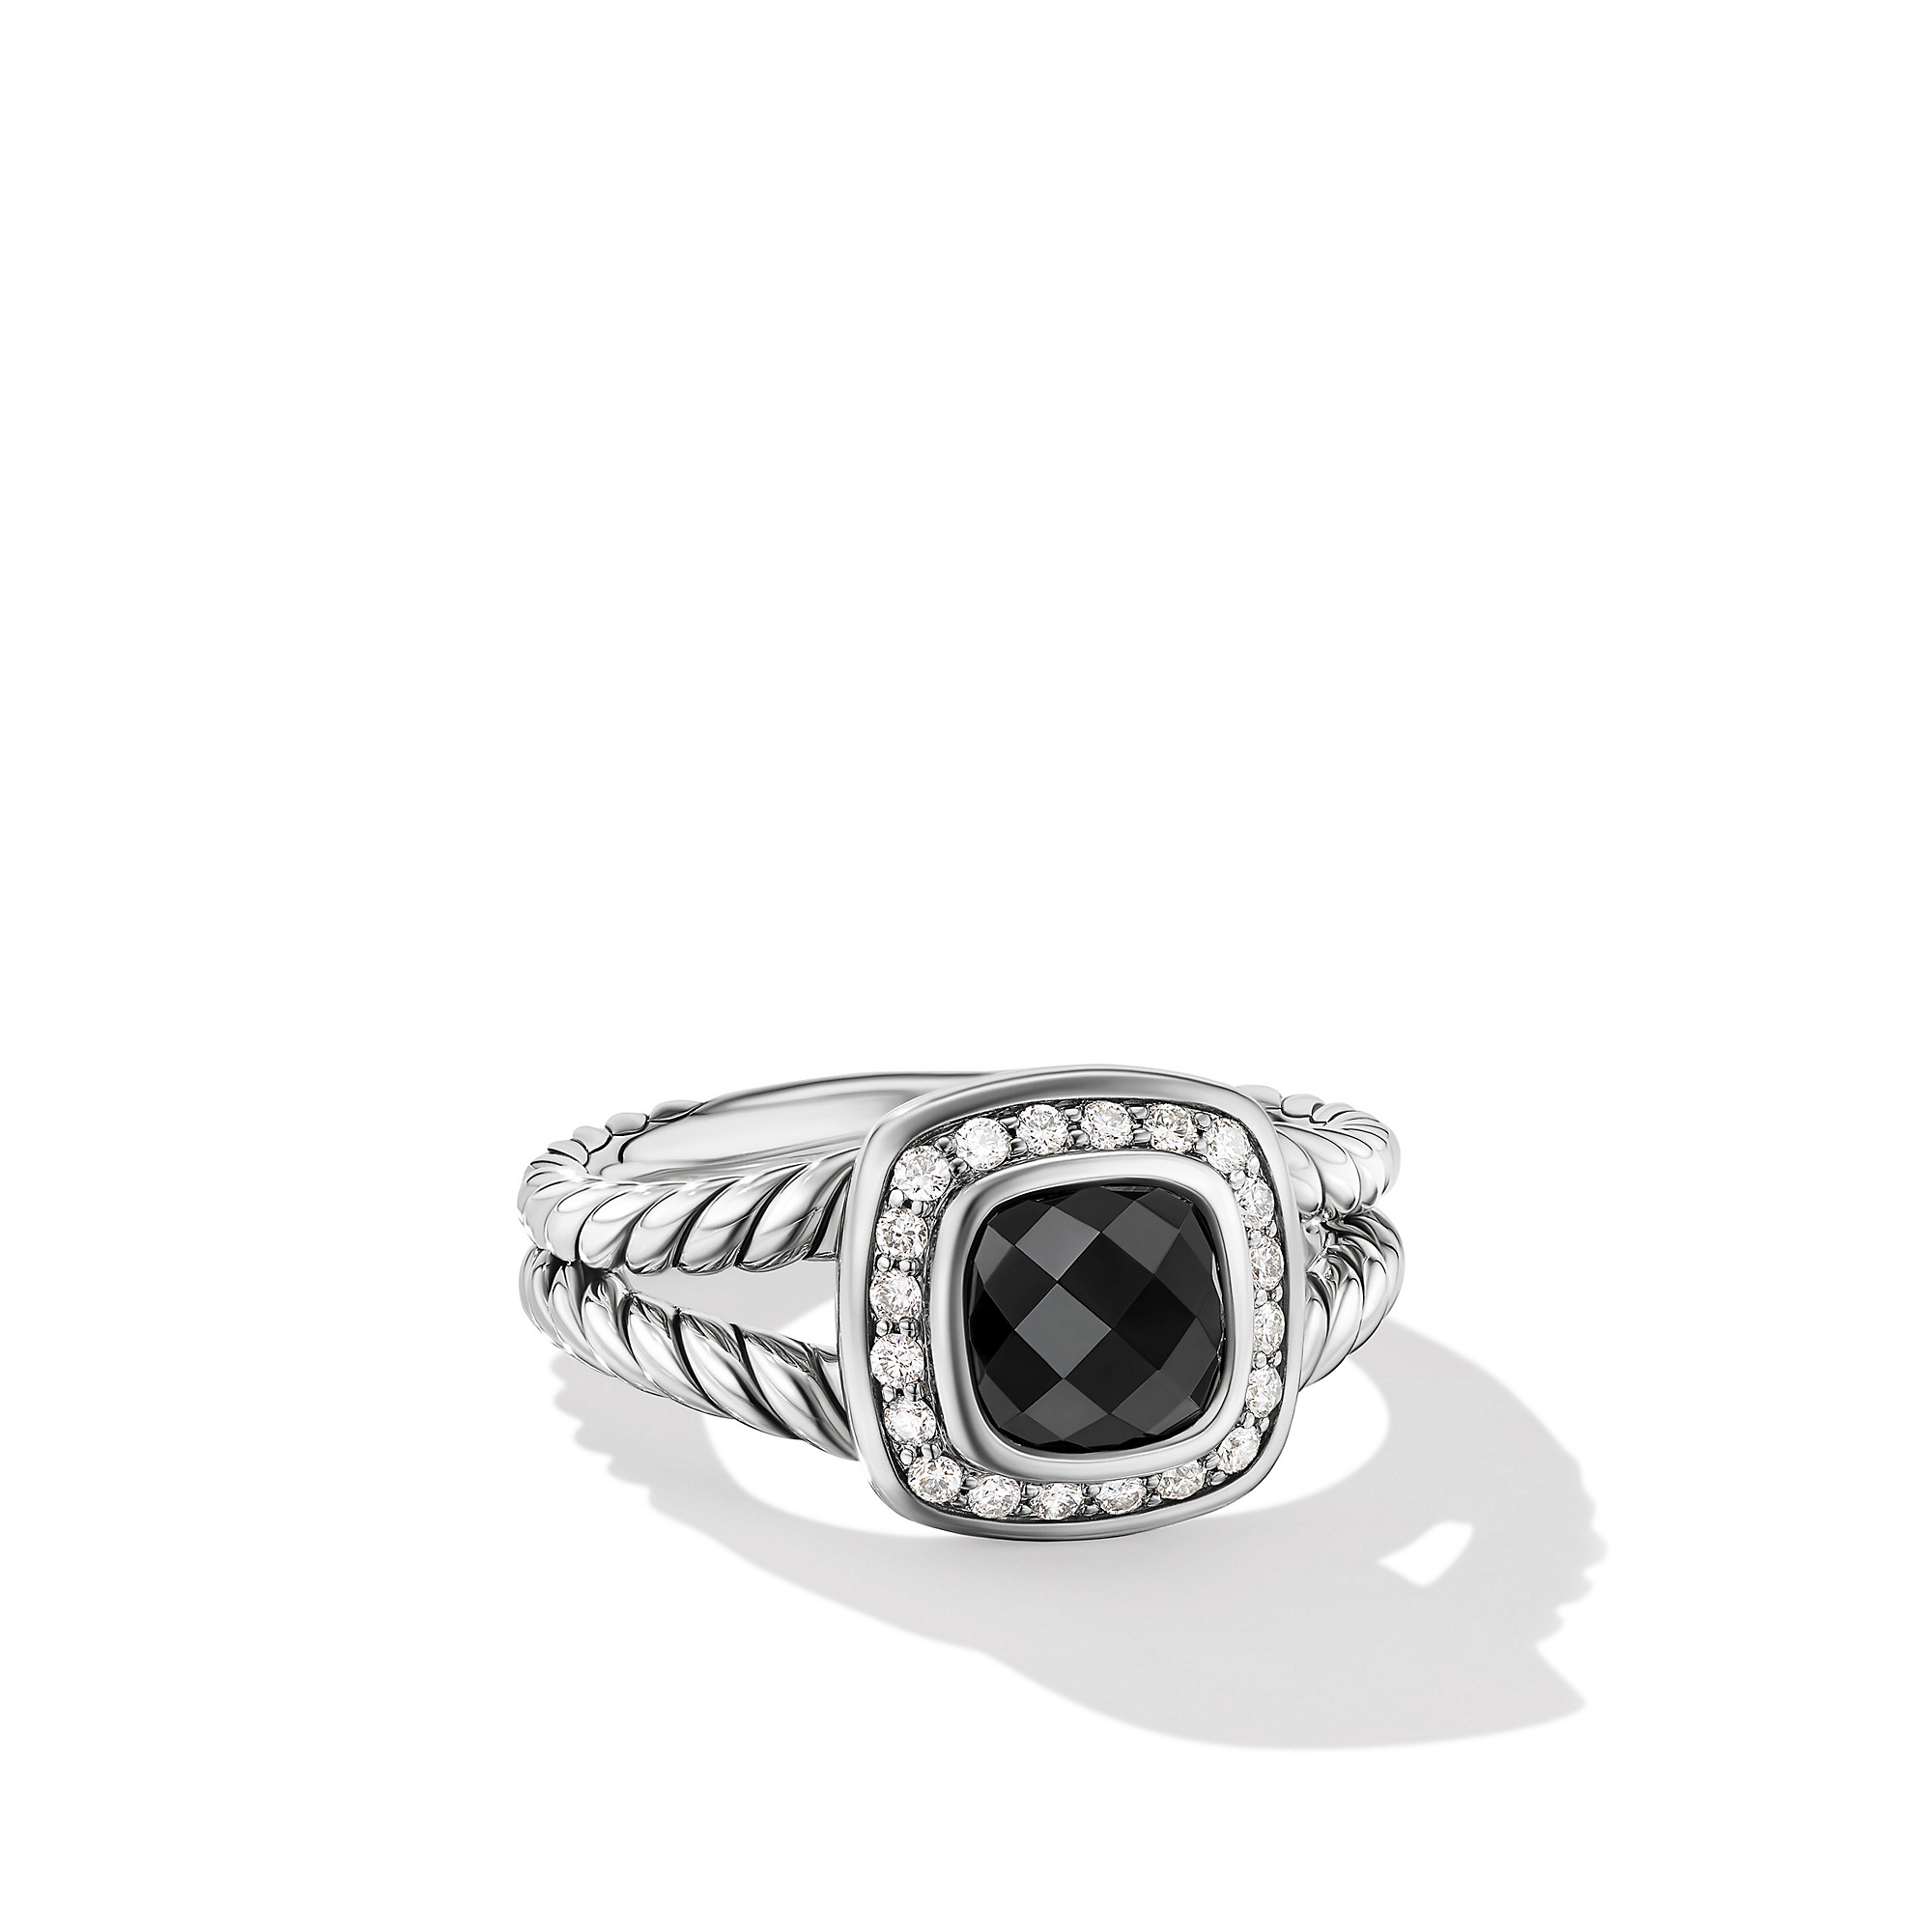 Petite Albion® Ring with Black Onyx and Diamonds